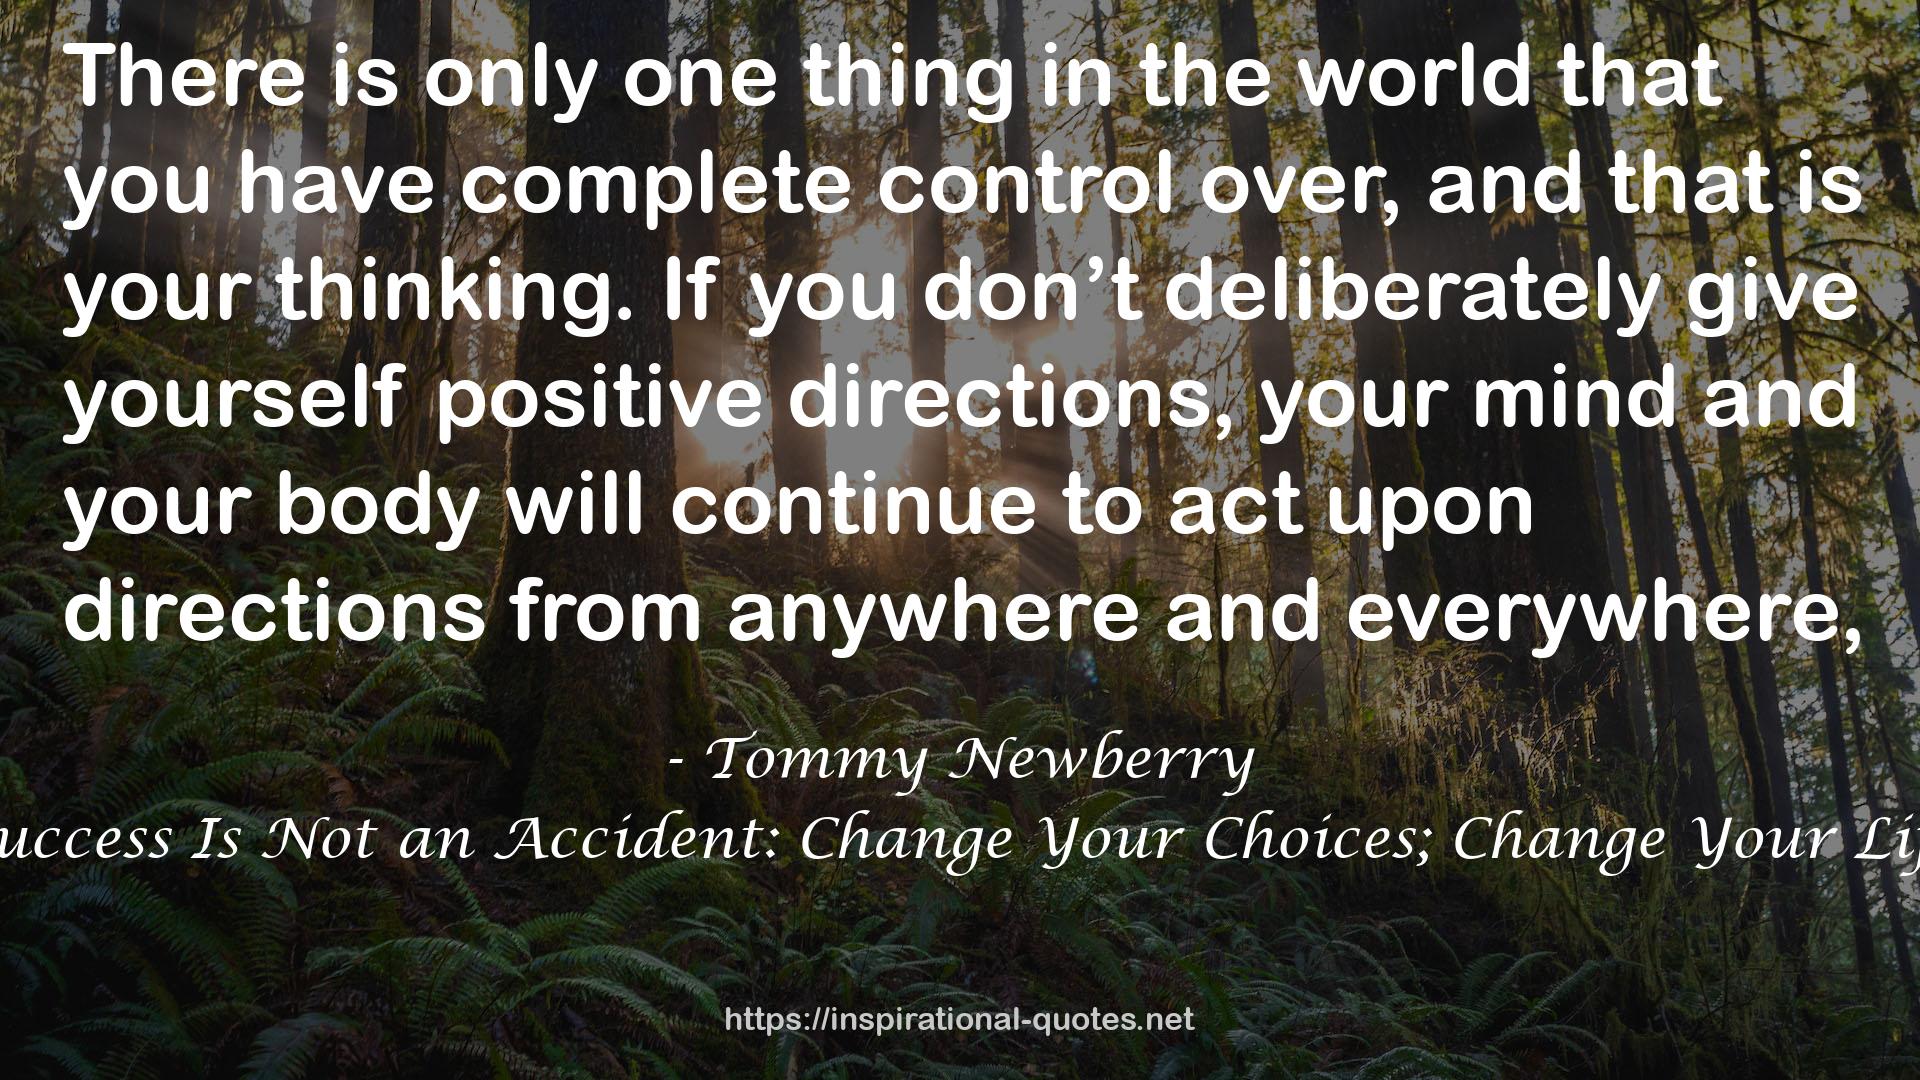 Success Is Not an Accident: Change Your Choices; Change Your Life QUOTES